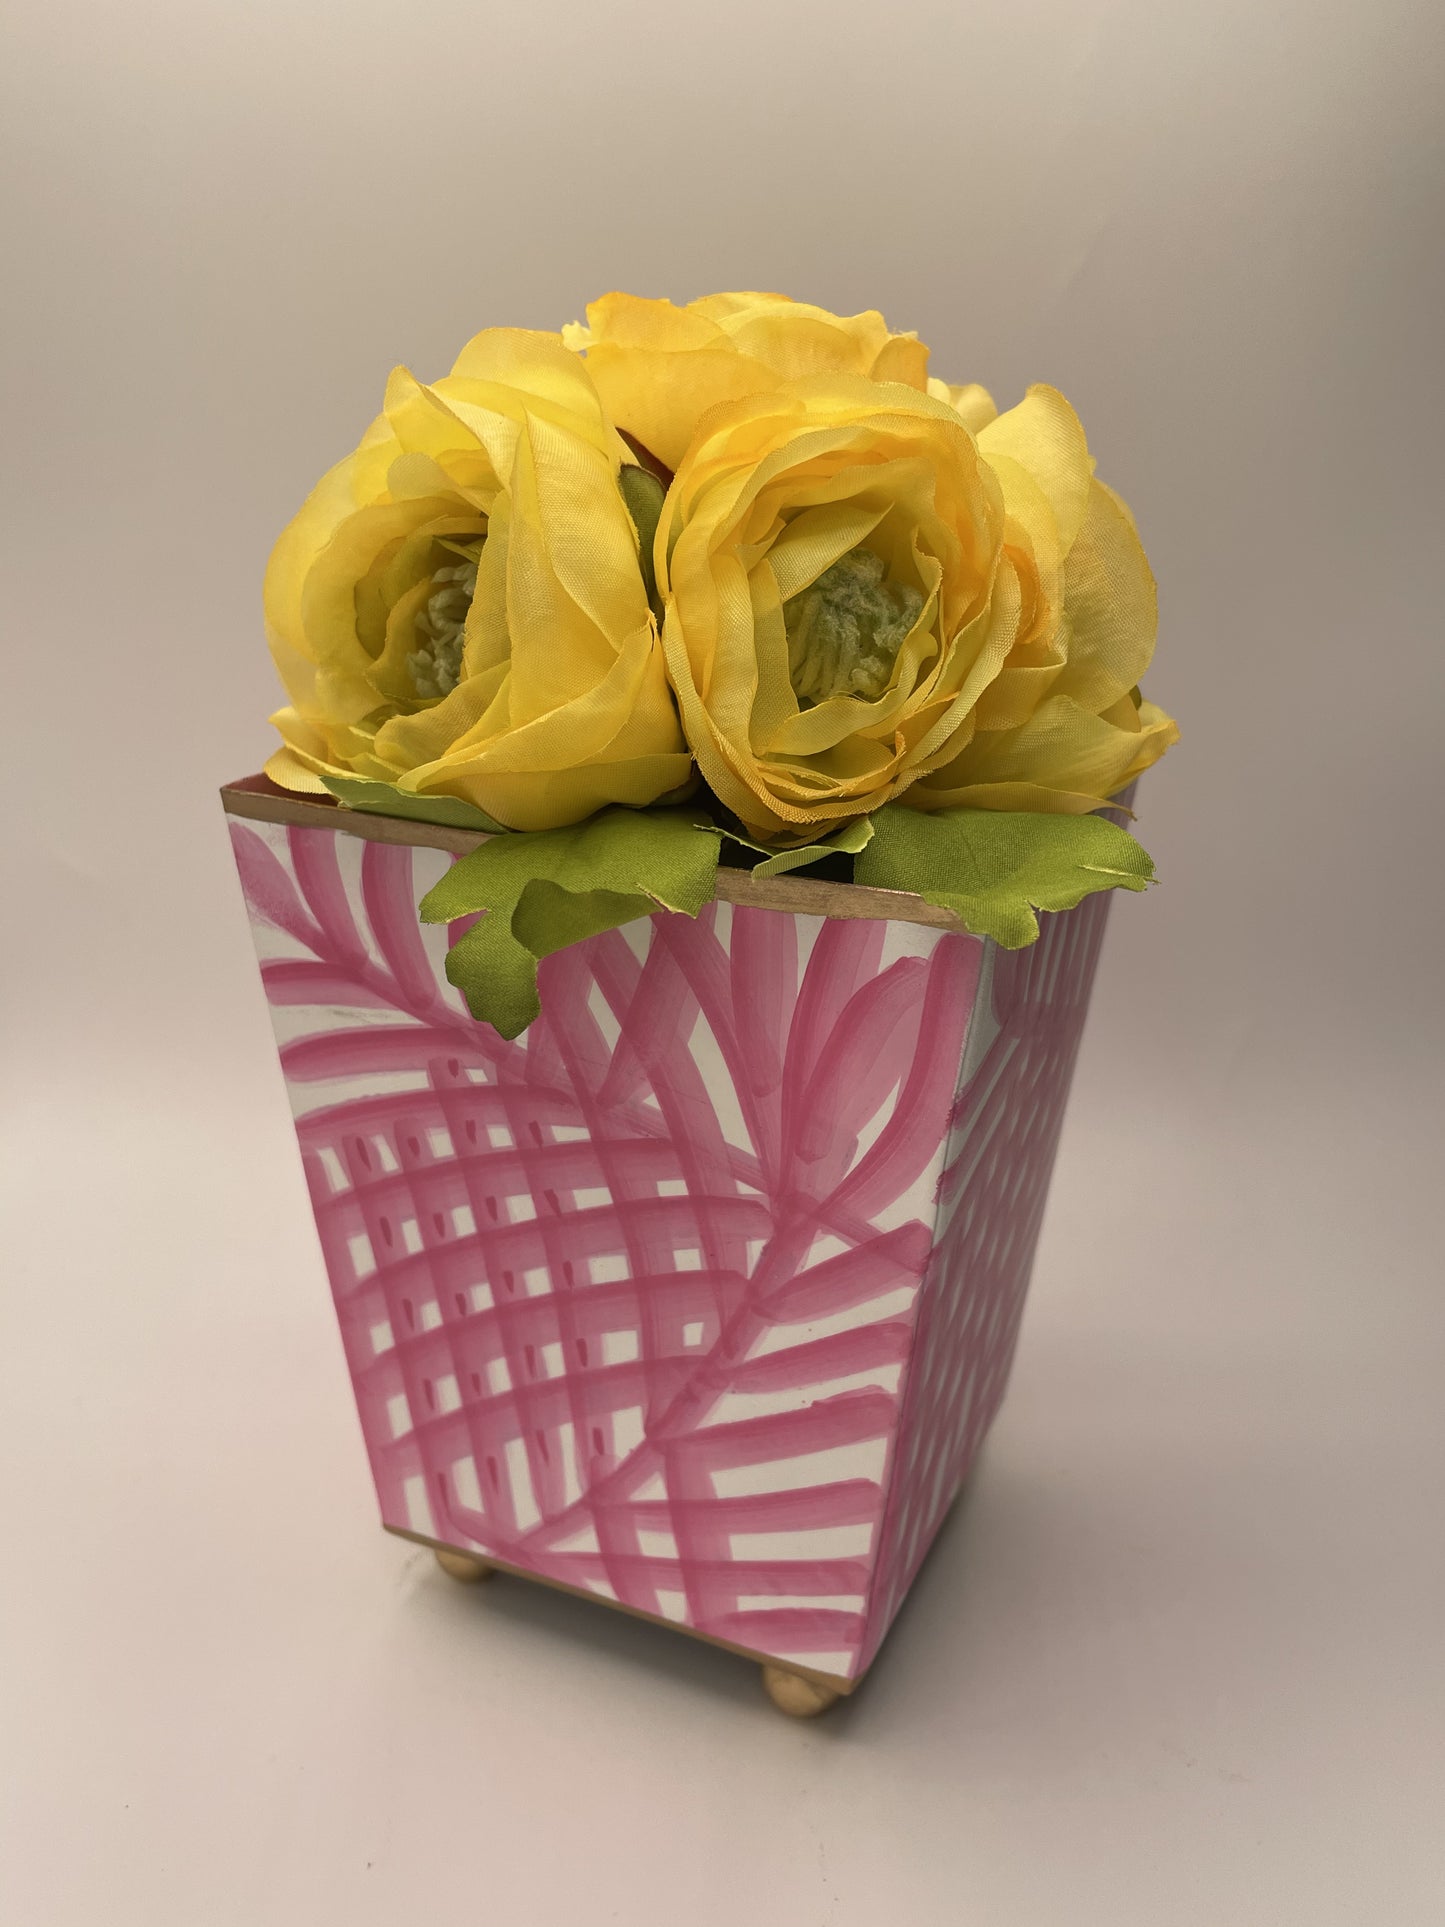 7" Artificial Yellow Ranunculus fixed in Glass Cube